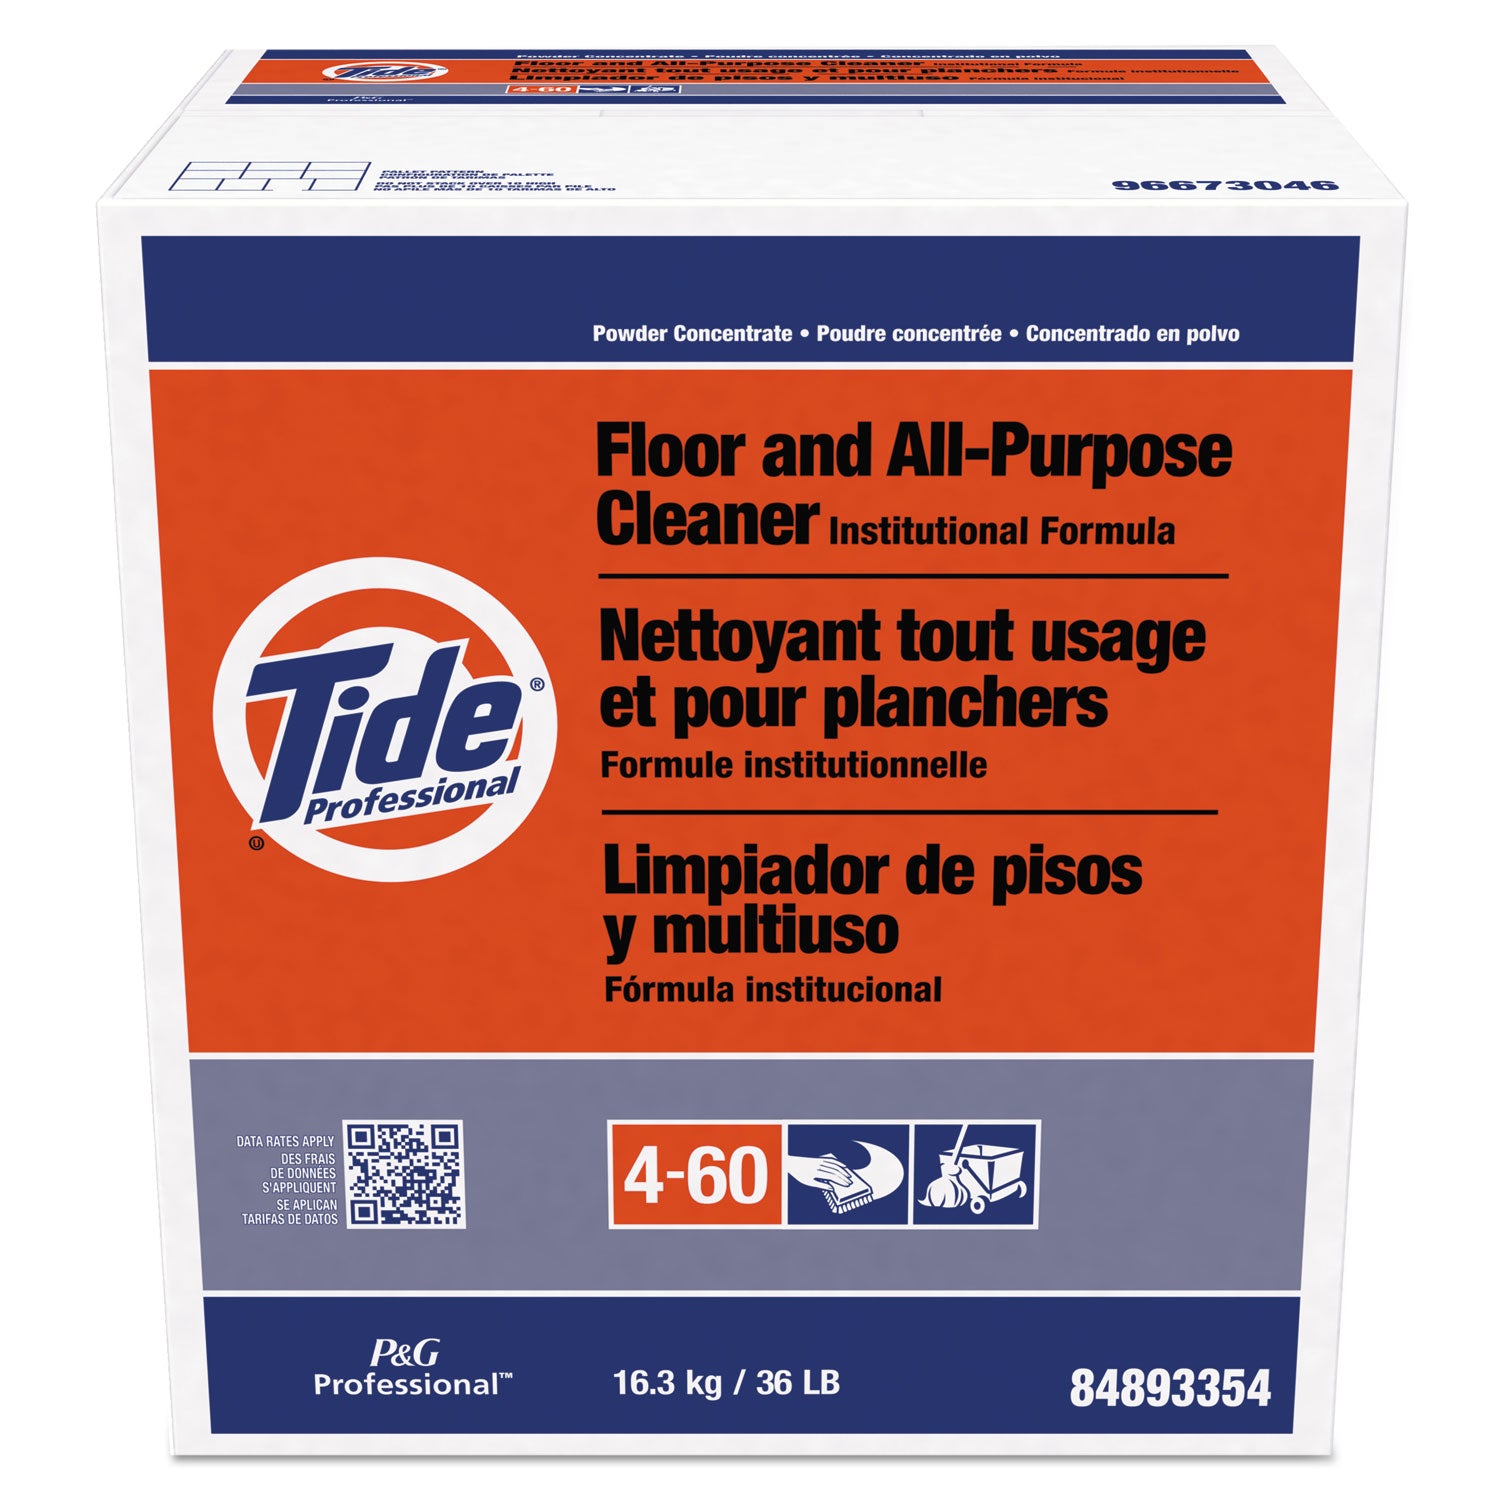 Floor and All-Purpose Cleaner, 36 lb Box - 